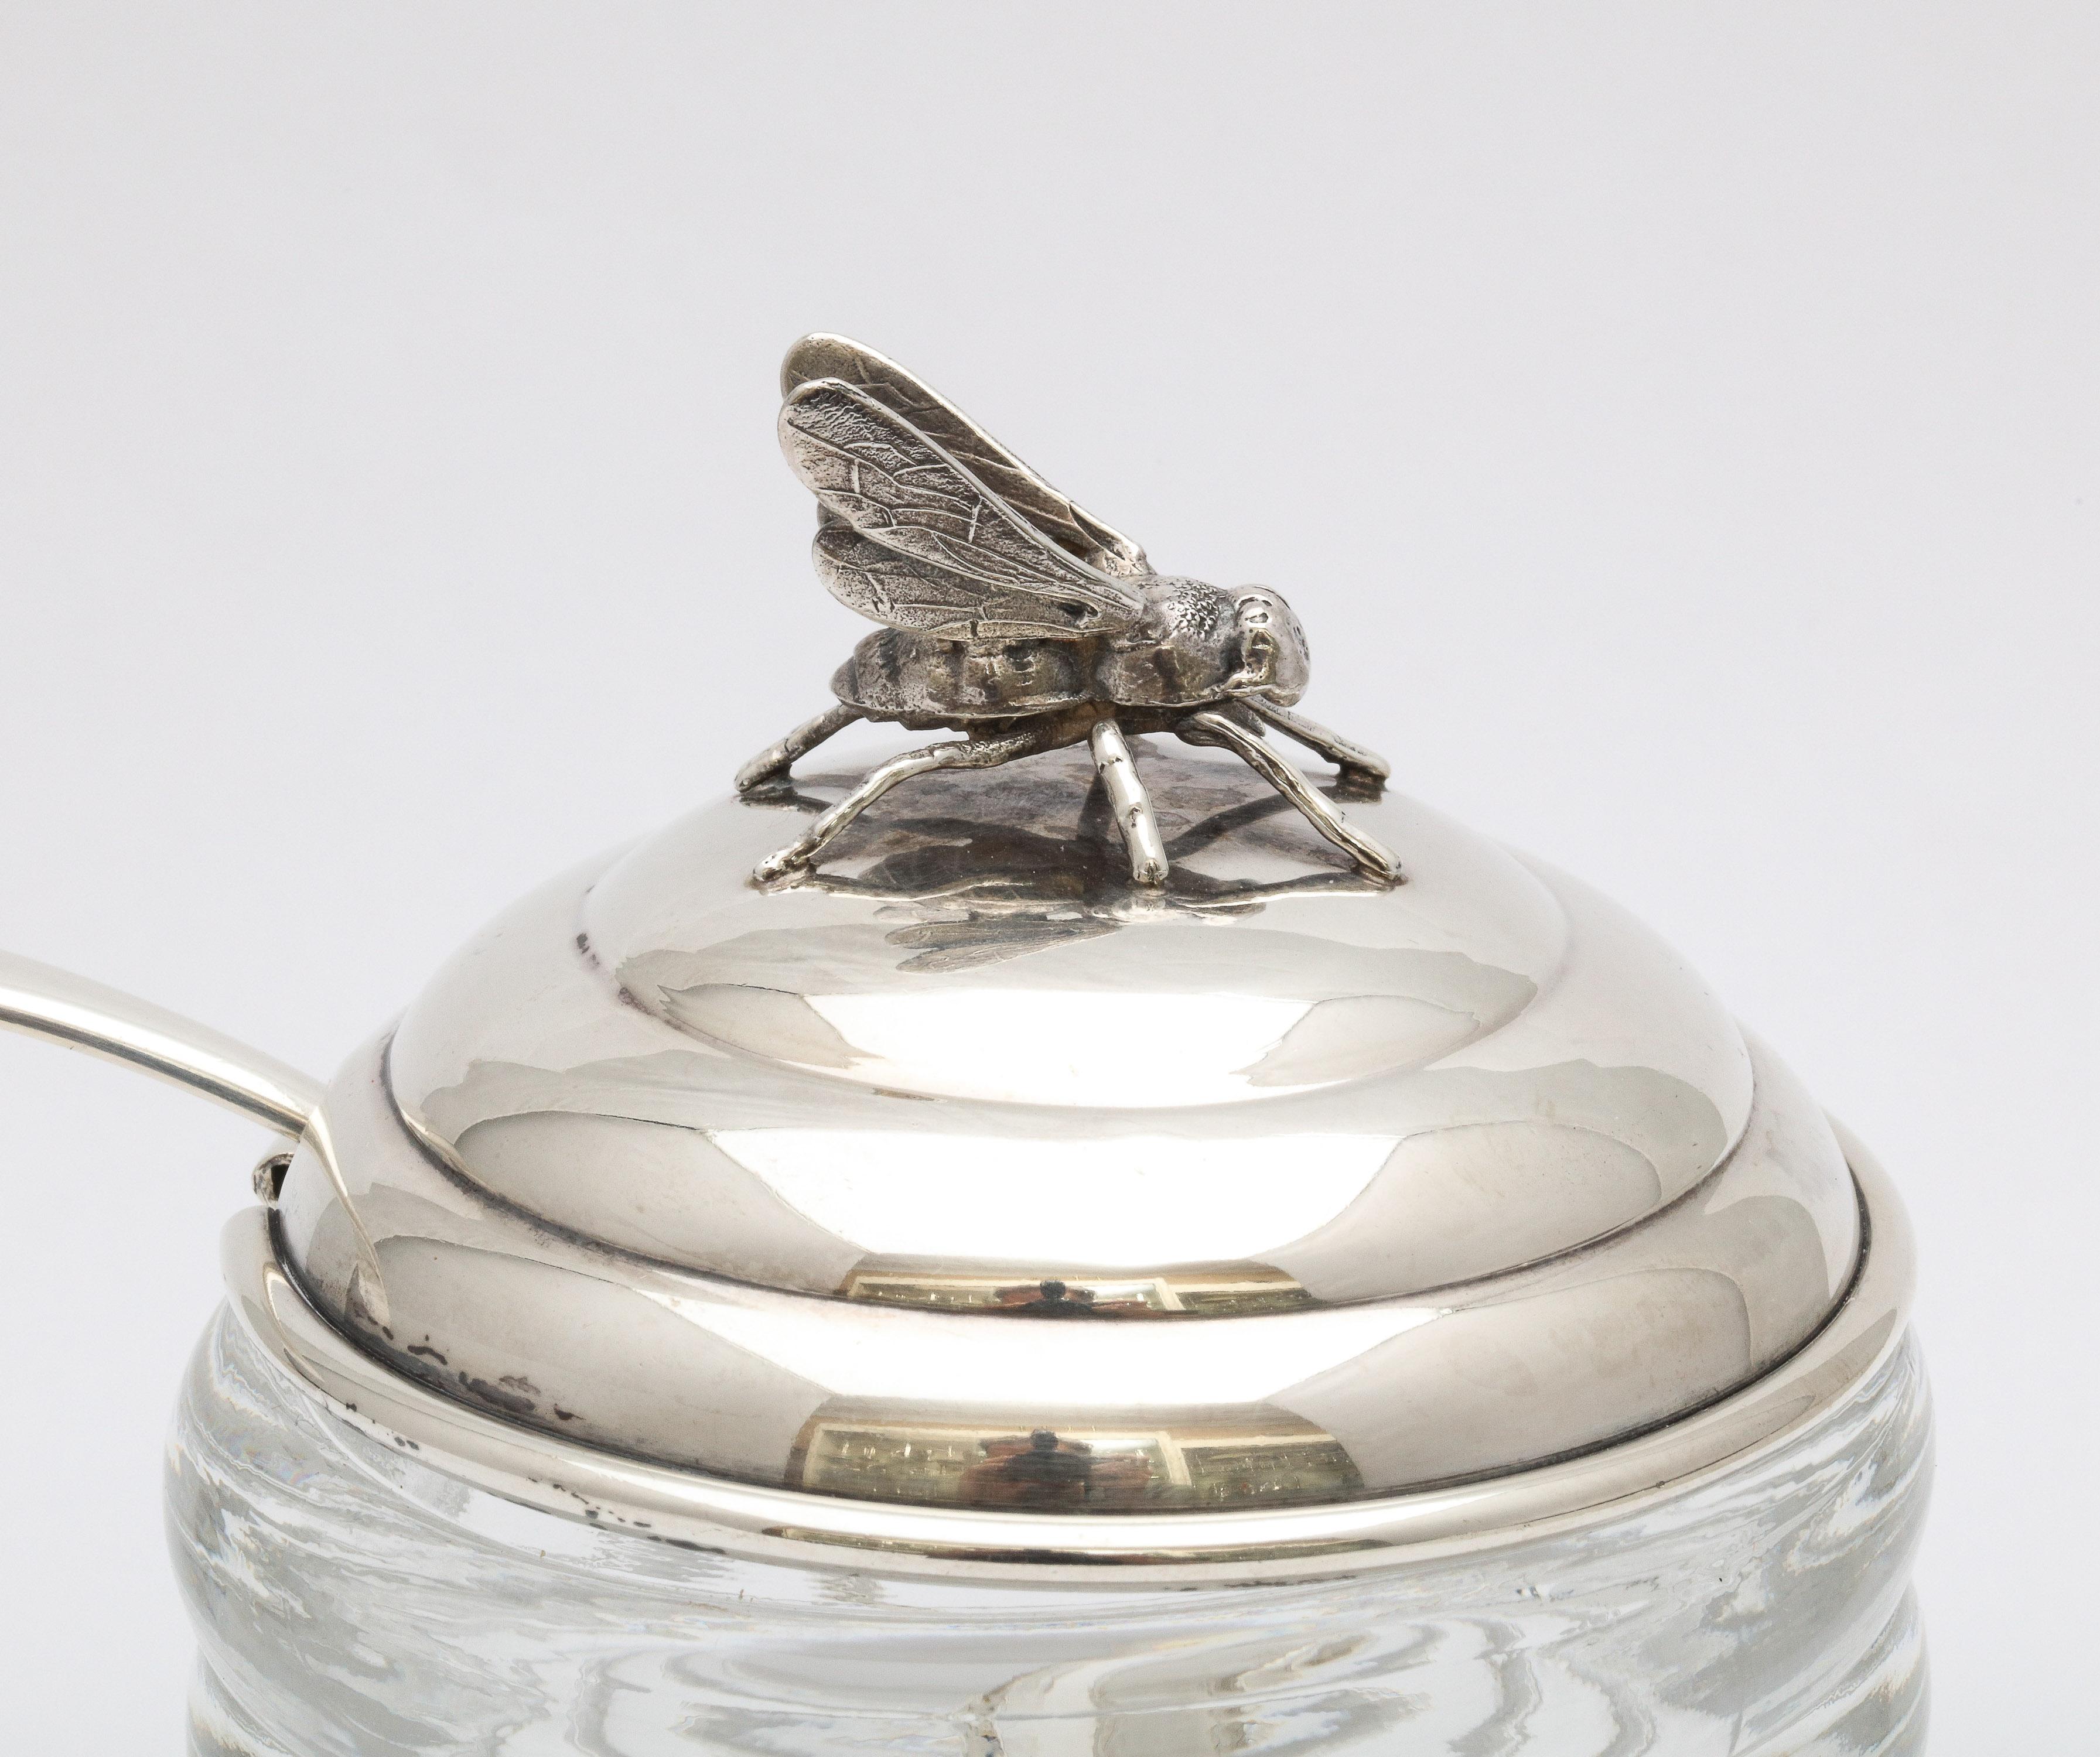 Art Deco Period Sterling Silver-Mounted Beehive-Form Honey Jar With Spoon 4